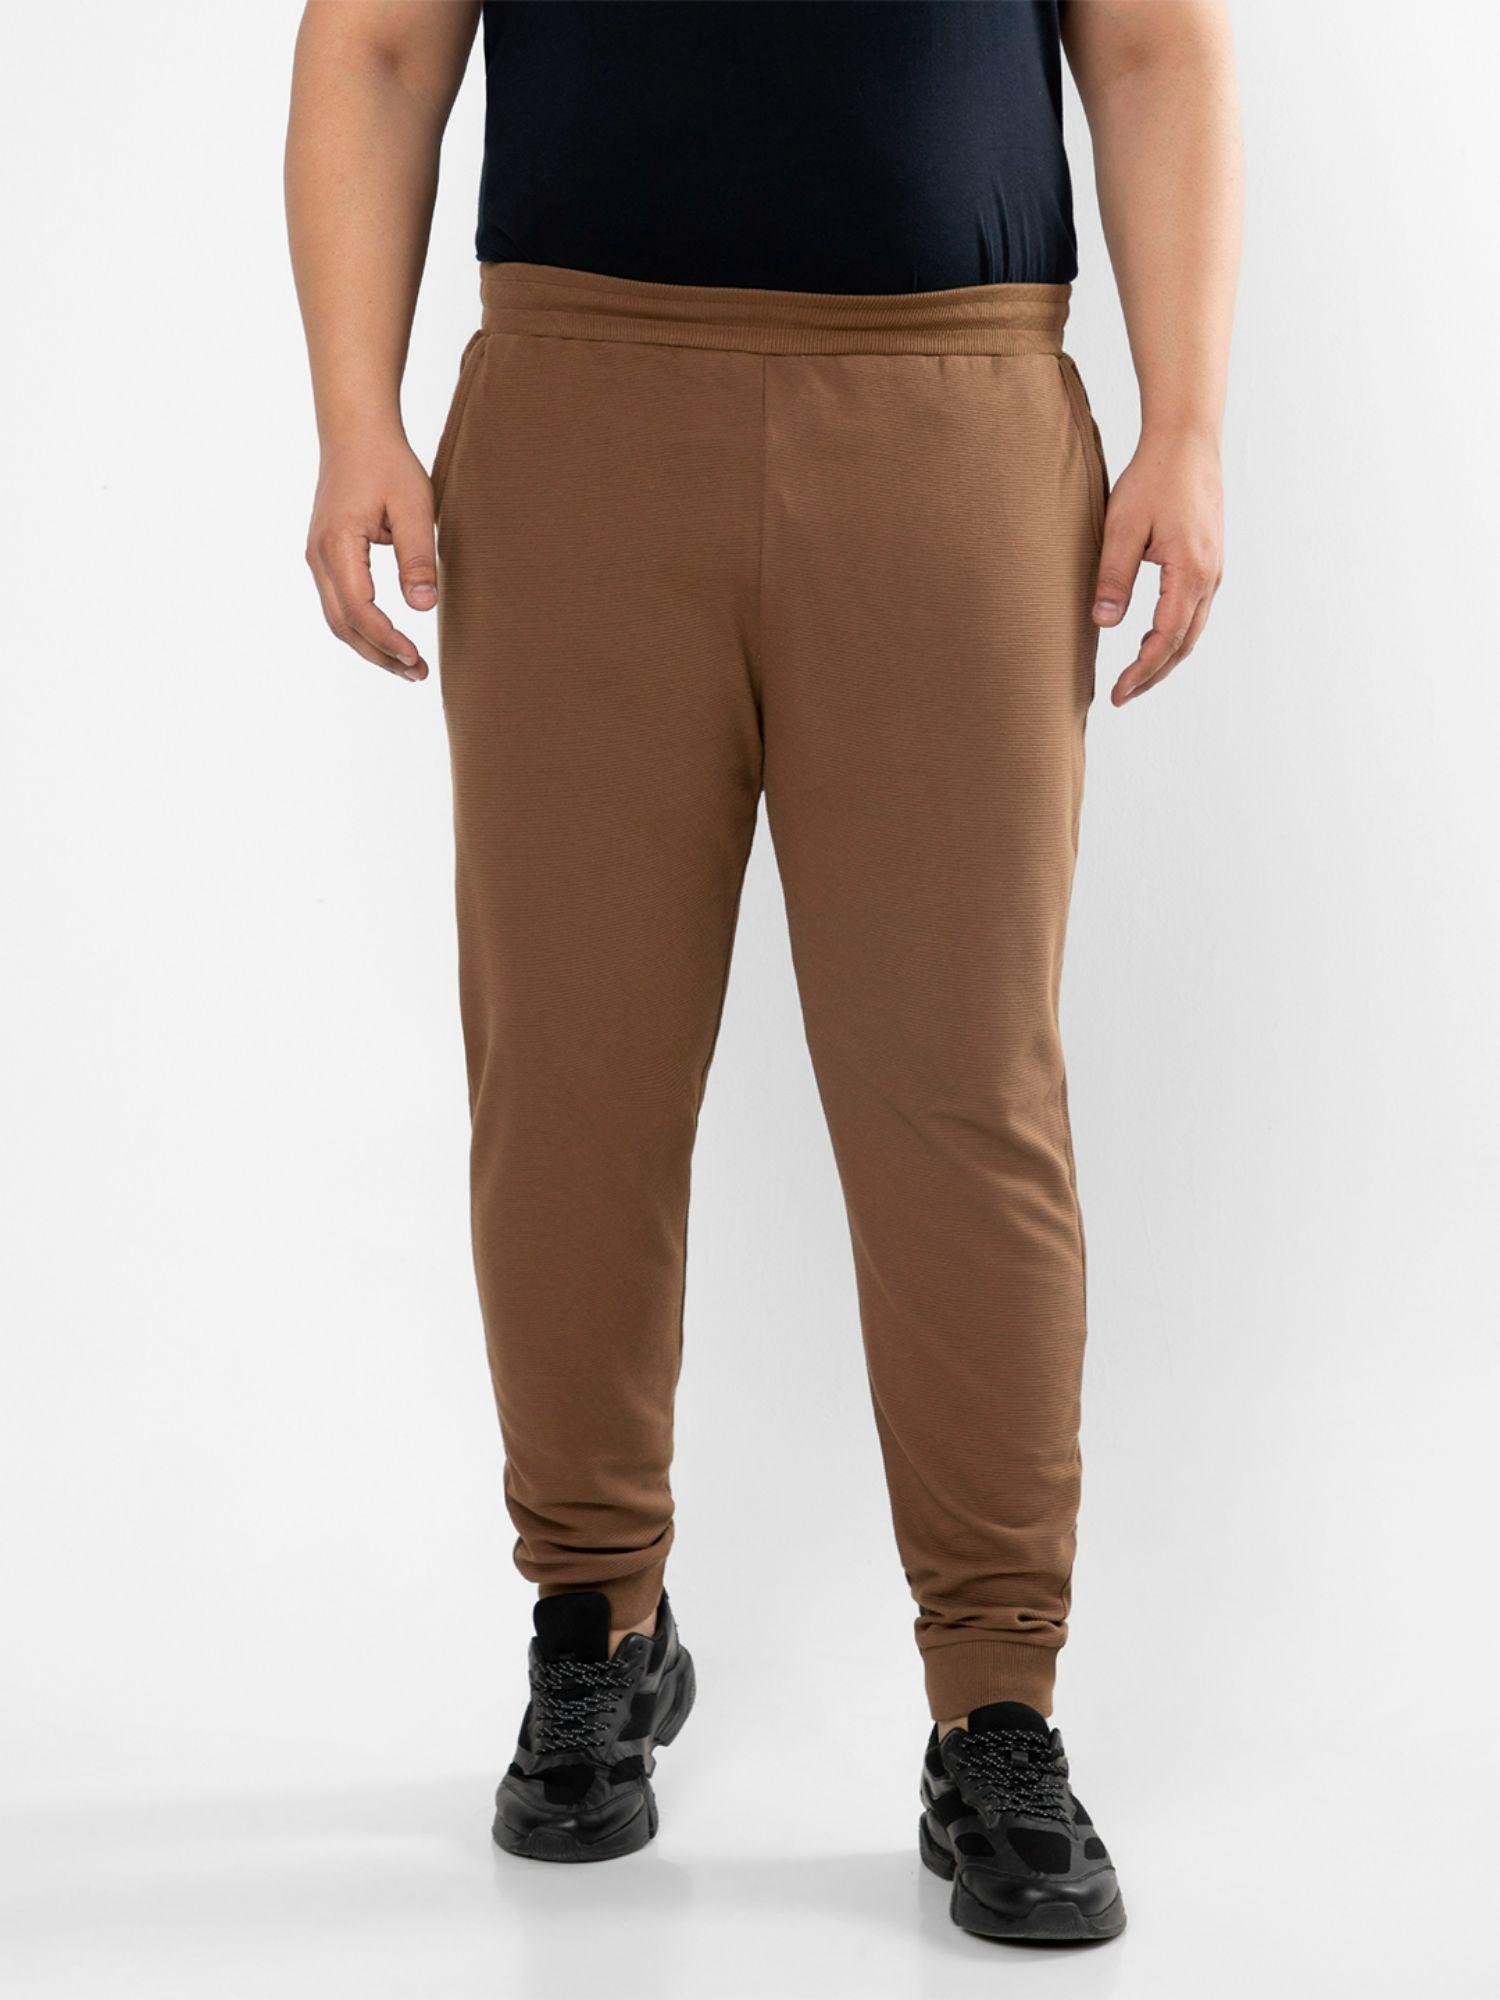 size men's solid stylish evening trackpant,brown